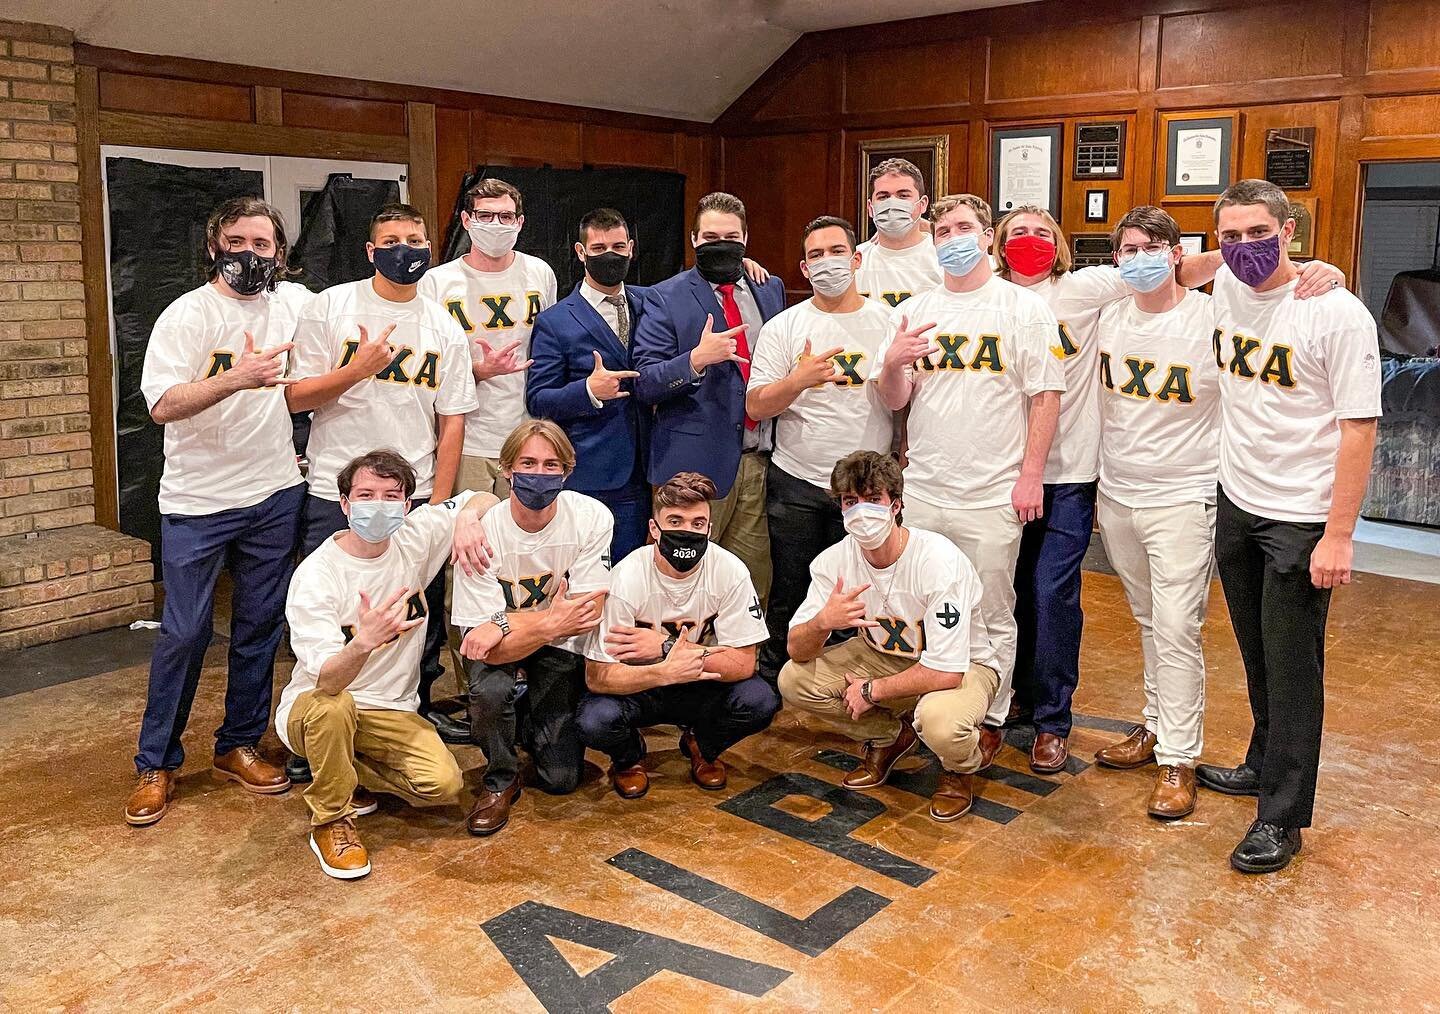 Congratulations to the 2020 Class of Lambda Chi Alpha! After several setbacks throughout this crazy year, we are so glad to finally be able to call these men our Brothers. #RushLambdaChi #ZAX